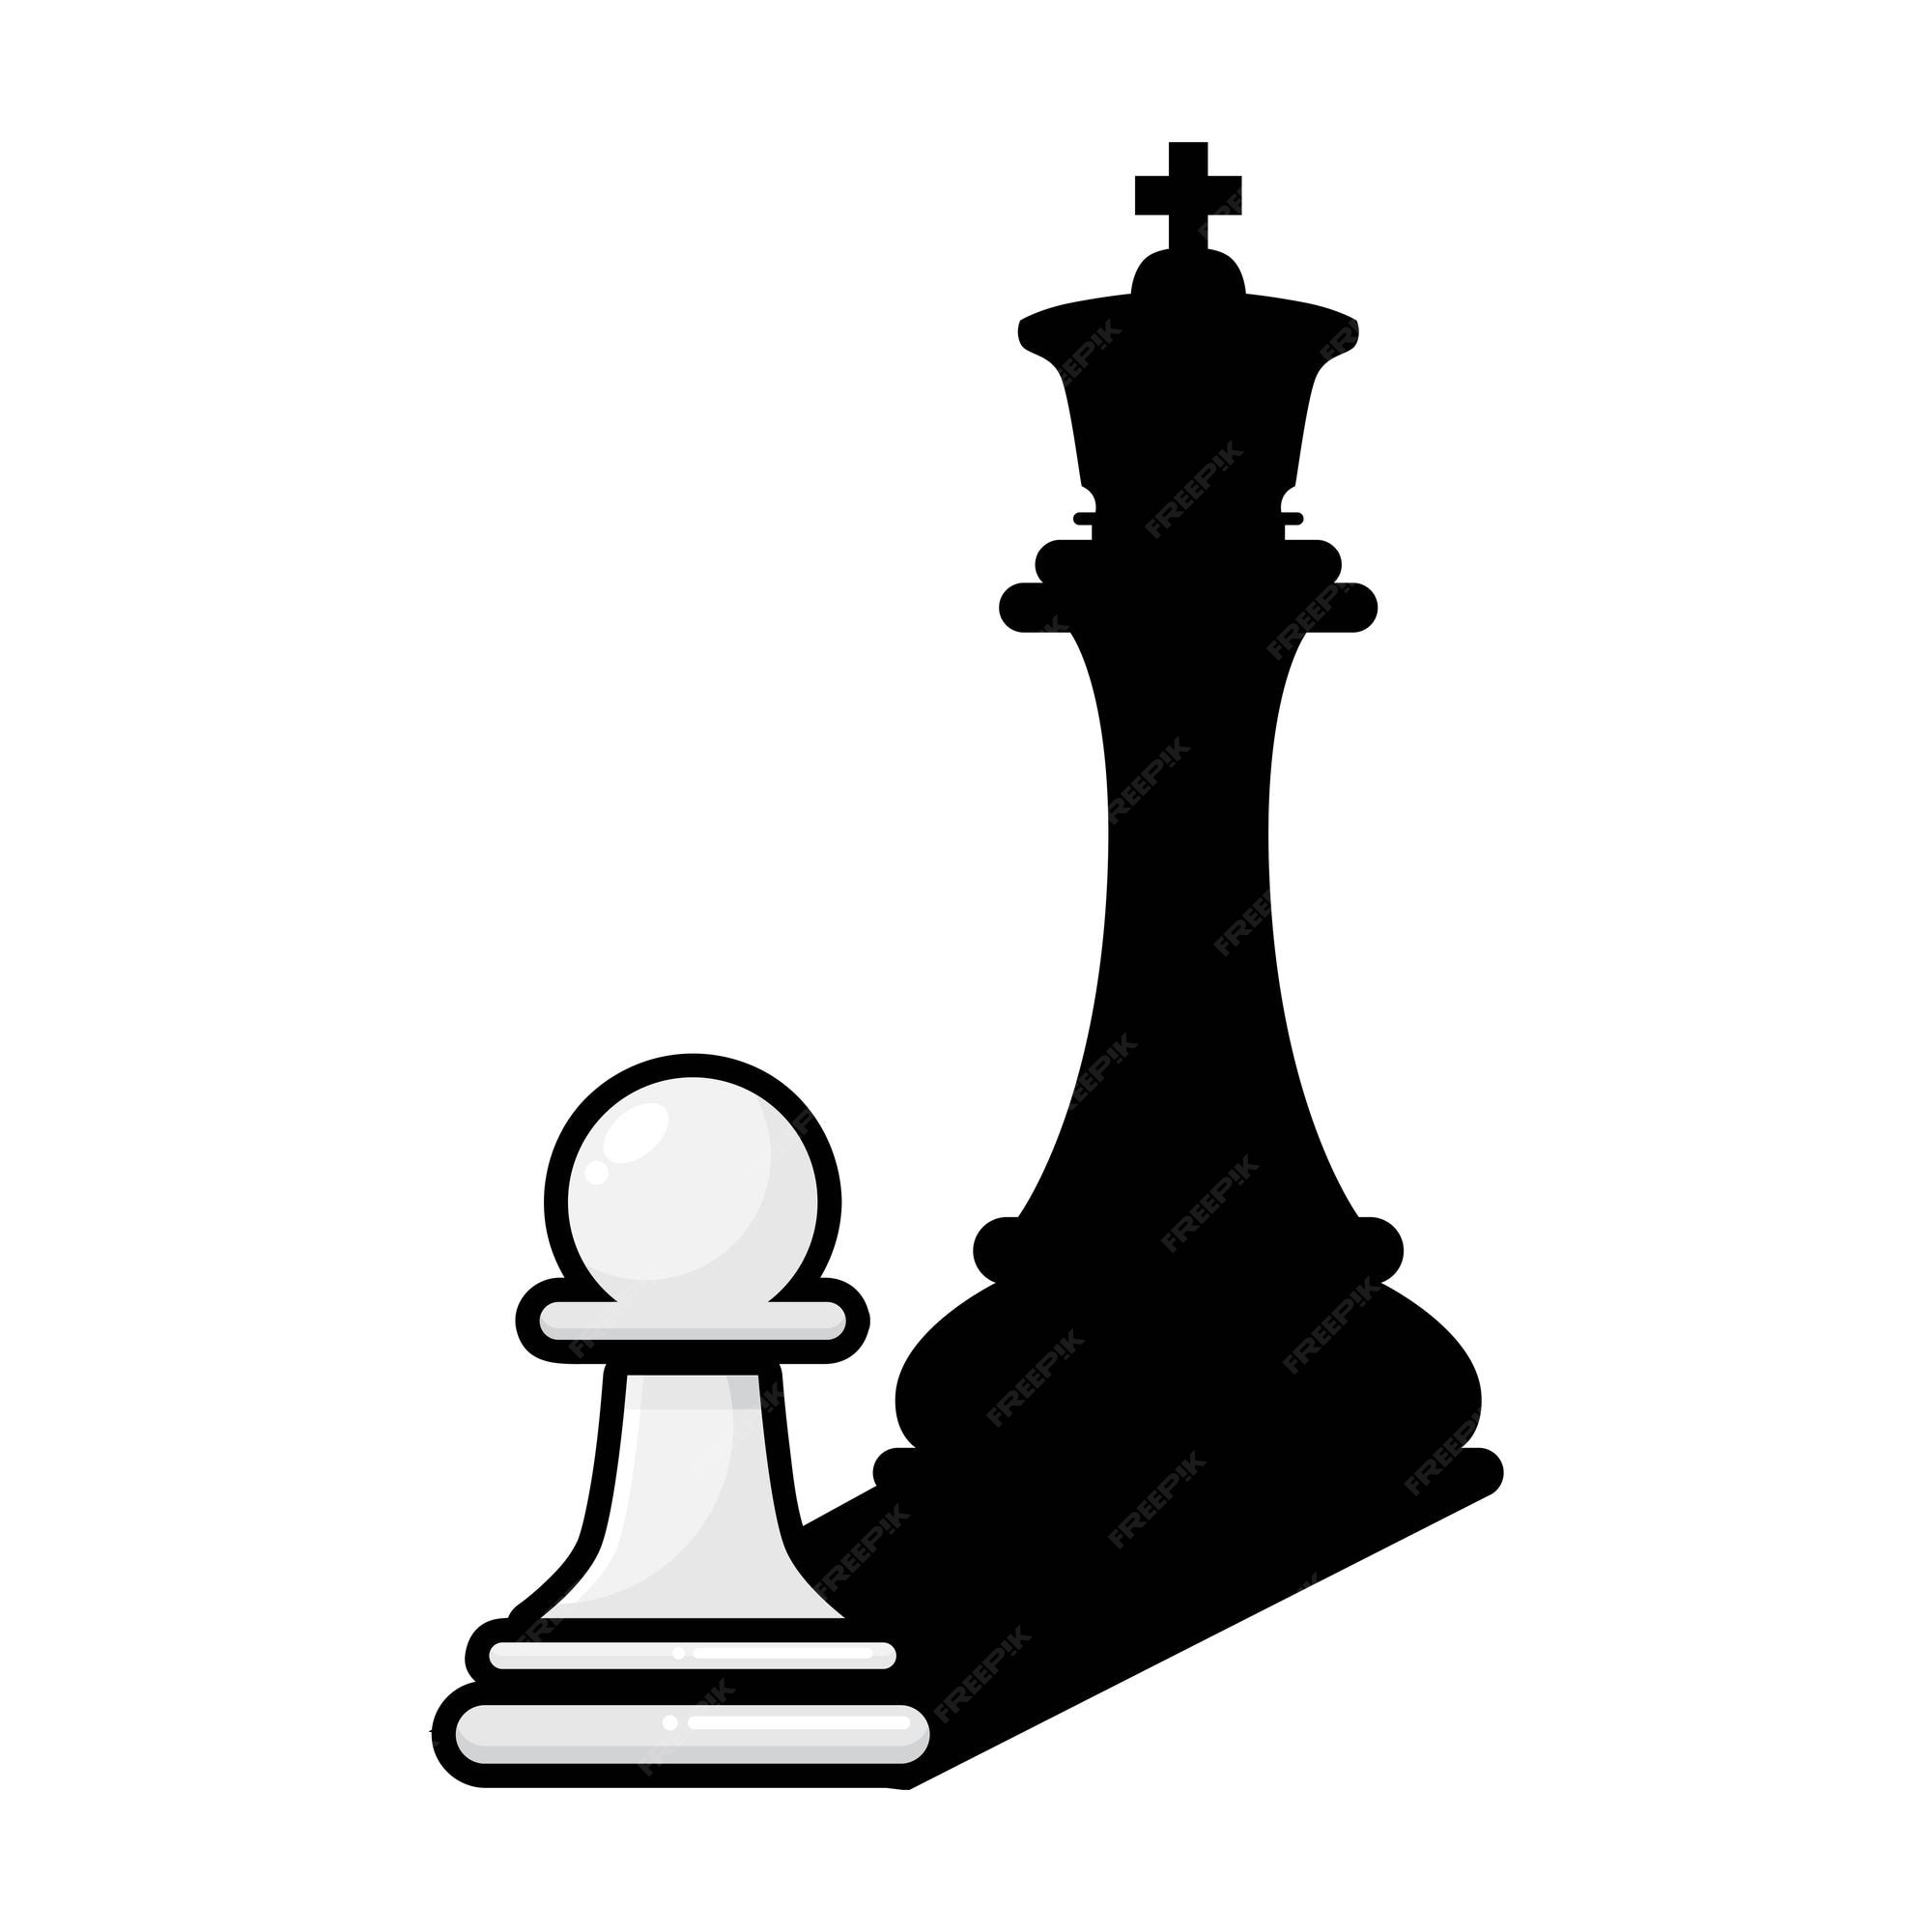 King chess piece realistic silhouette Royalty Free Vector